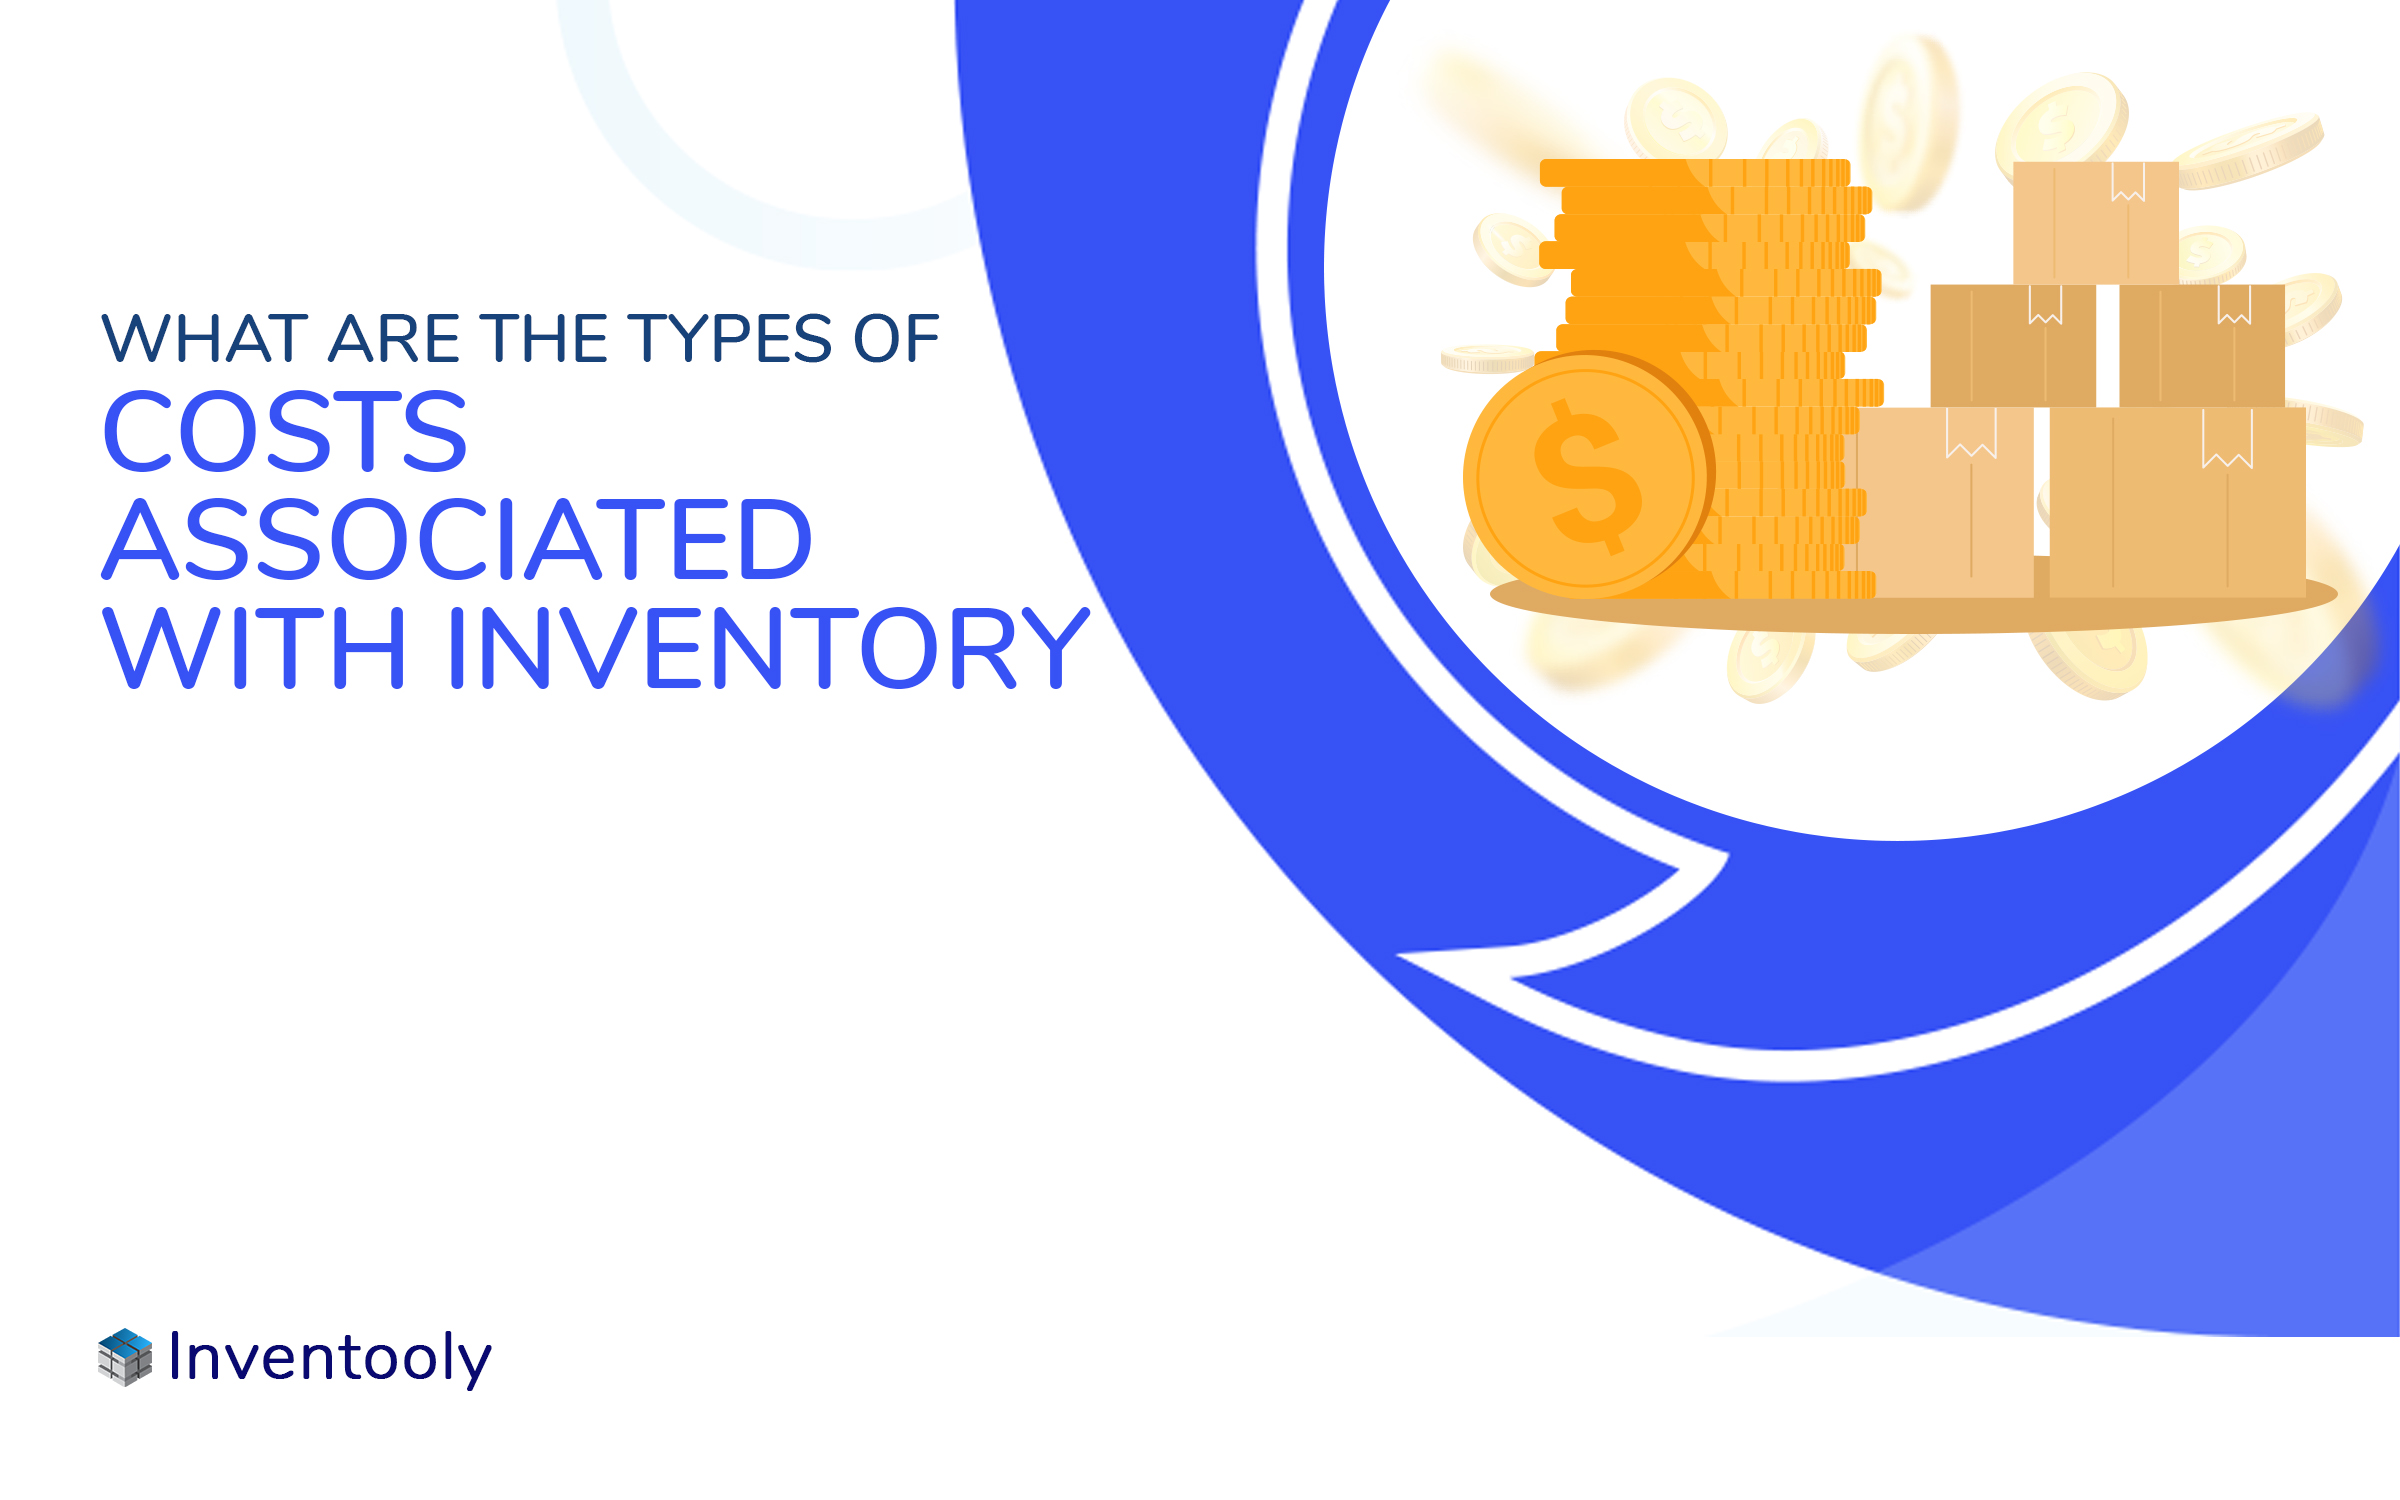 Types of costs associated with inventory